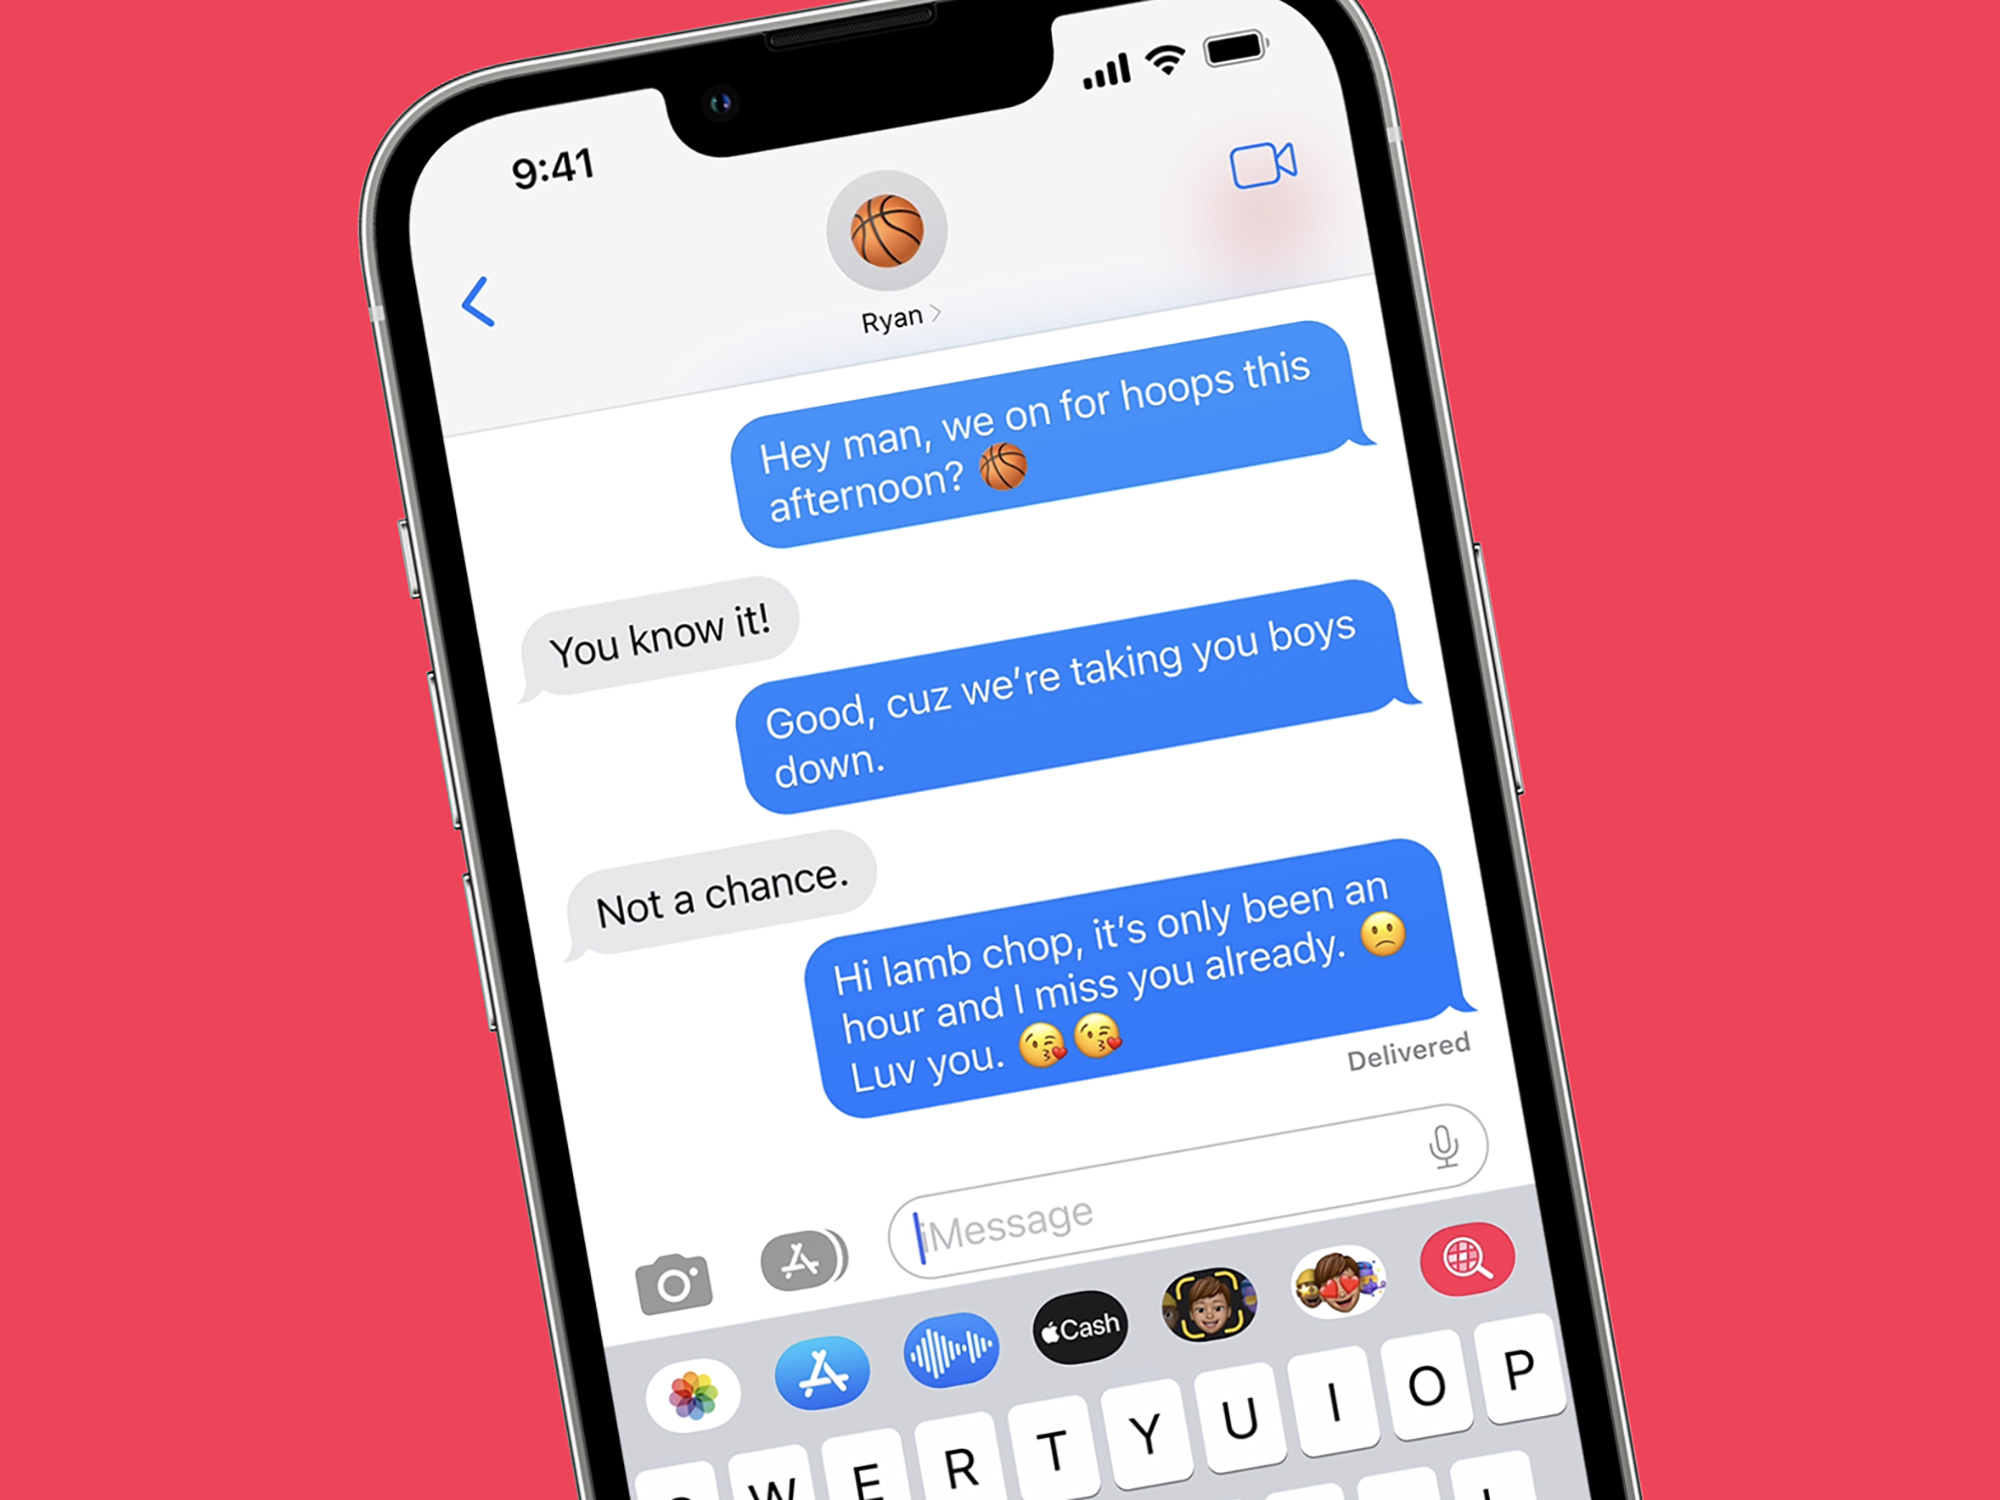 7 tips and tricks to get more out of Apple’s newly updated Messages app